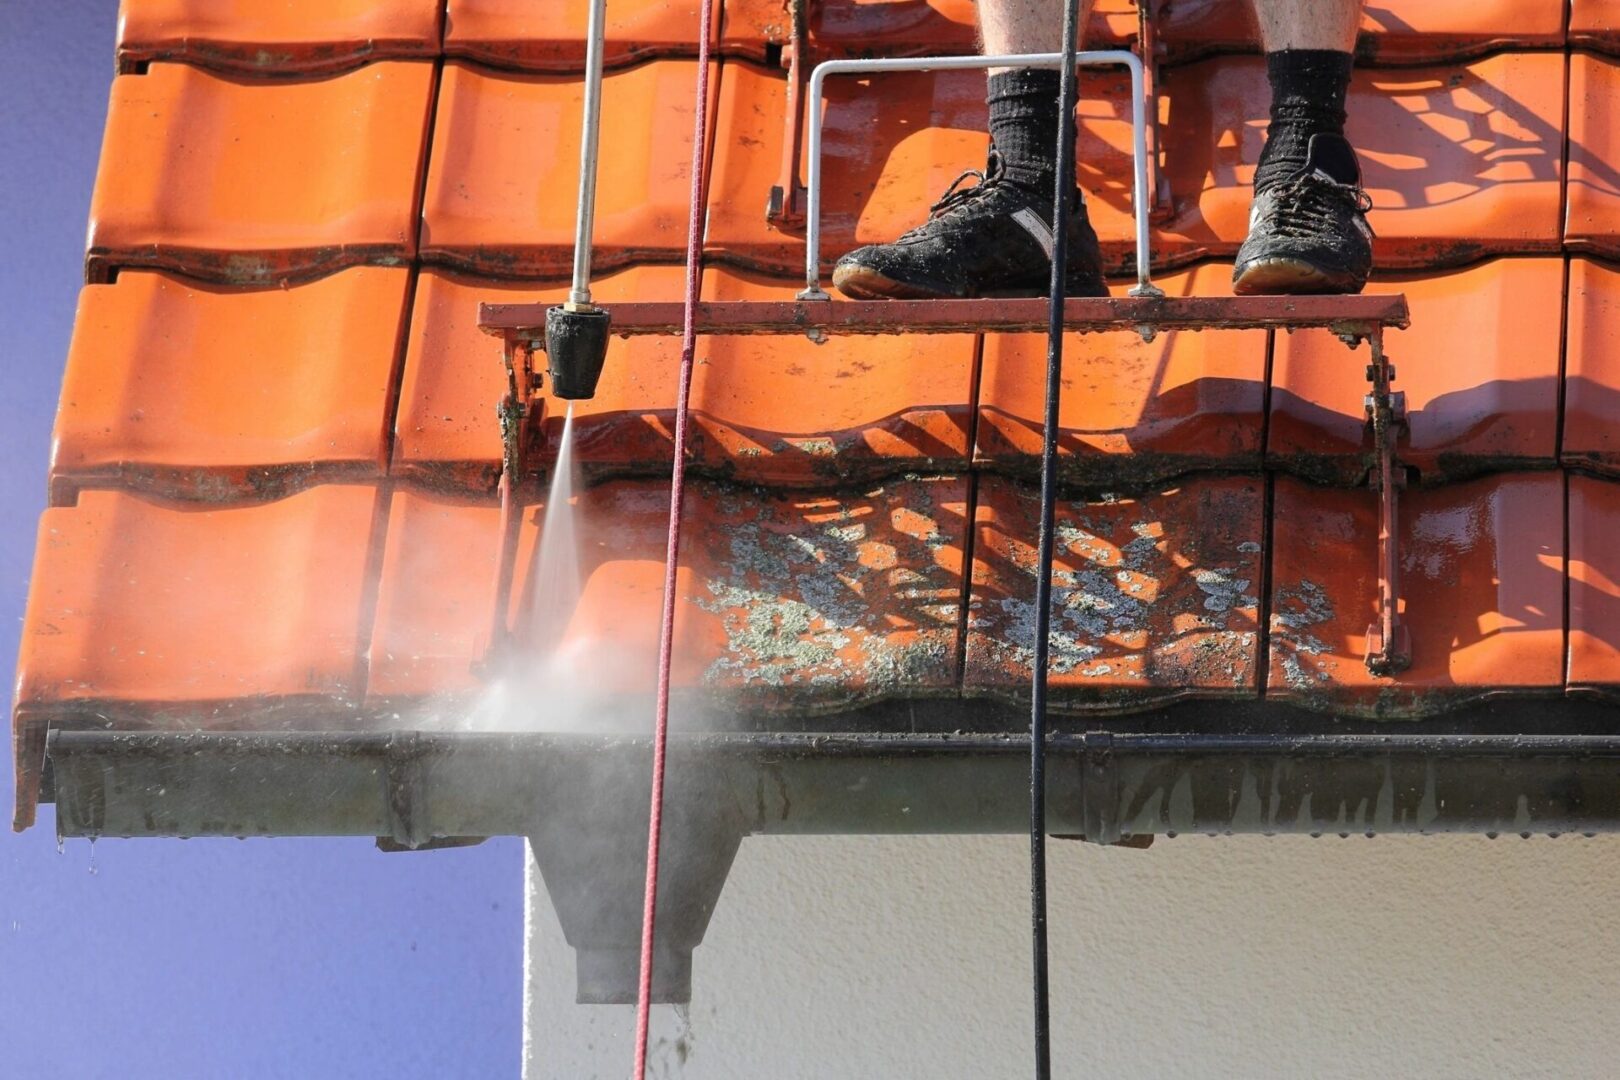 A person is cleaning the roof of a house.